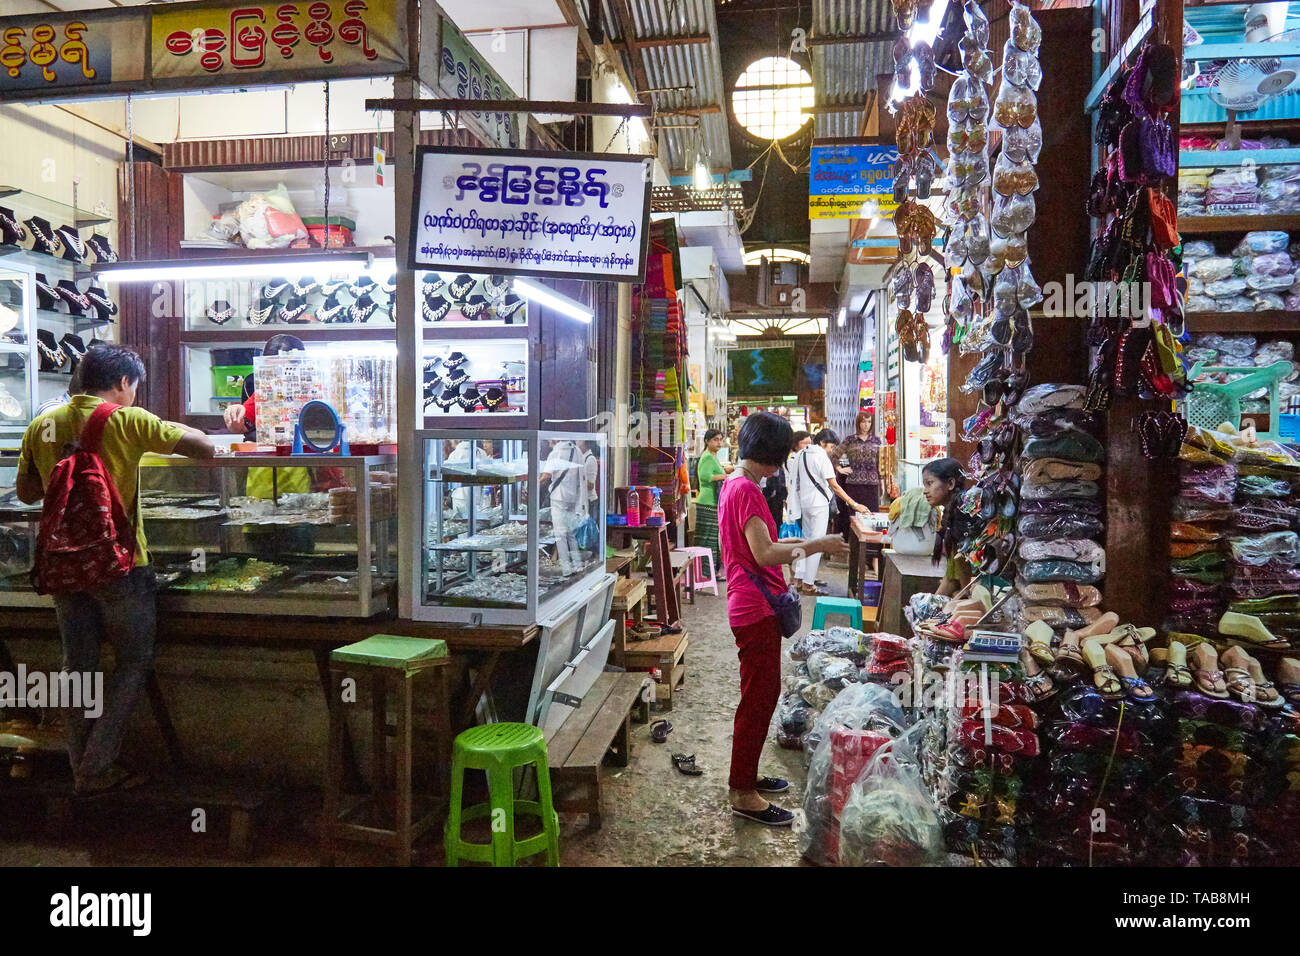 People shop in marketplace in Myanmar filled with shoes, clothing, and jewelry. Stock Photo